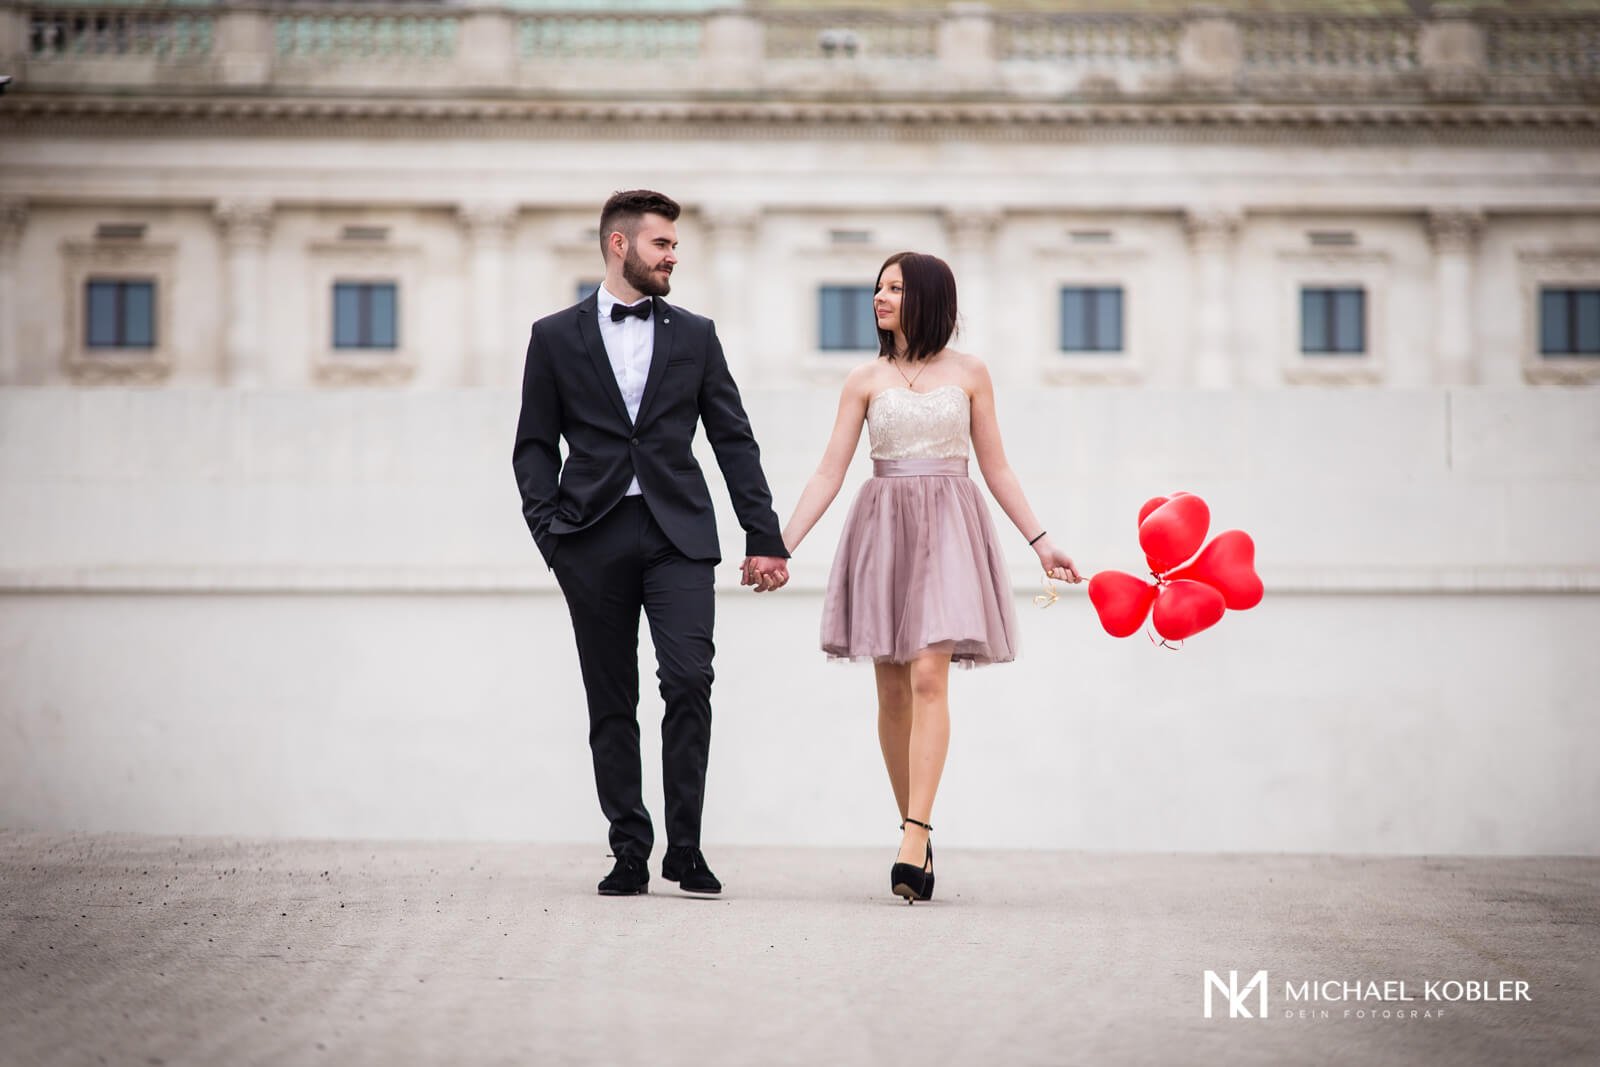 The 5 plus 1 best tips for engagement photos and couple photos